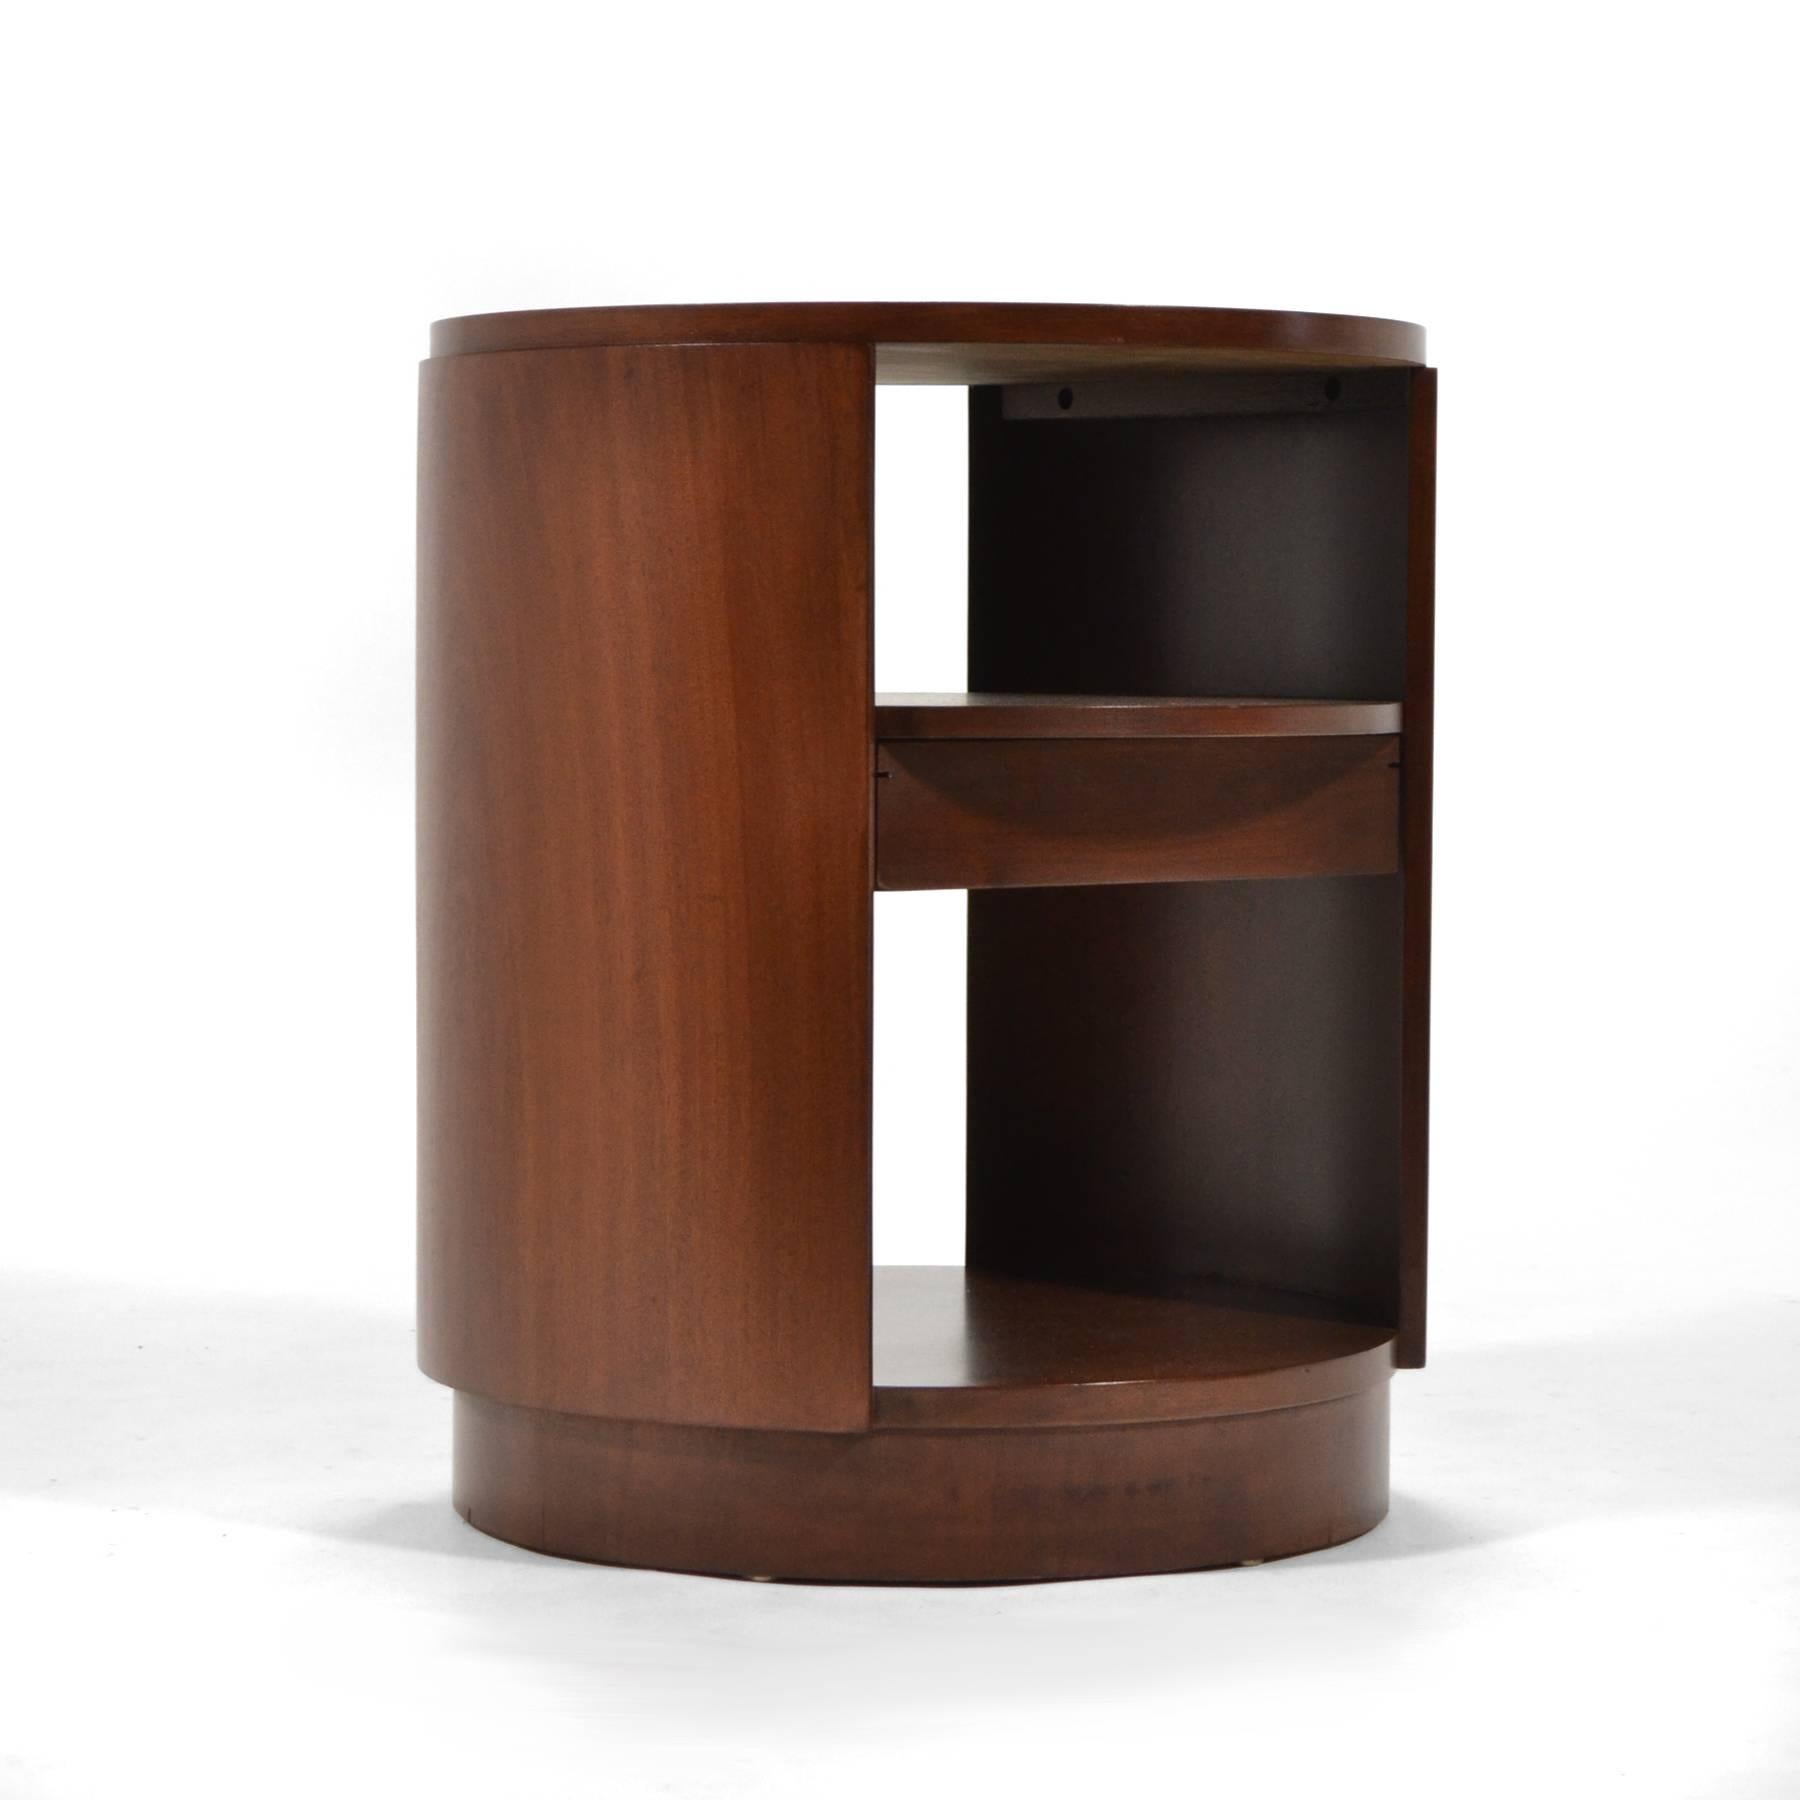 A beautiful design by Ed Wormley that references deco and modern aesthetics, this rare side table has a cylindrical form and a drawer below the middle shelf. Expertly crafted of mahogany by Dunbar and newly restored.